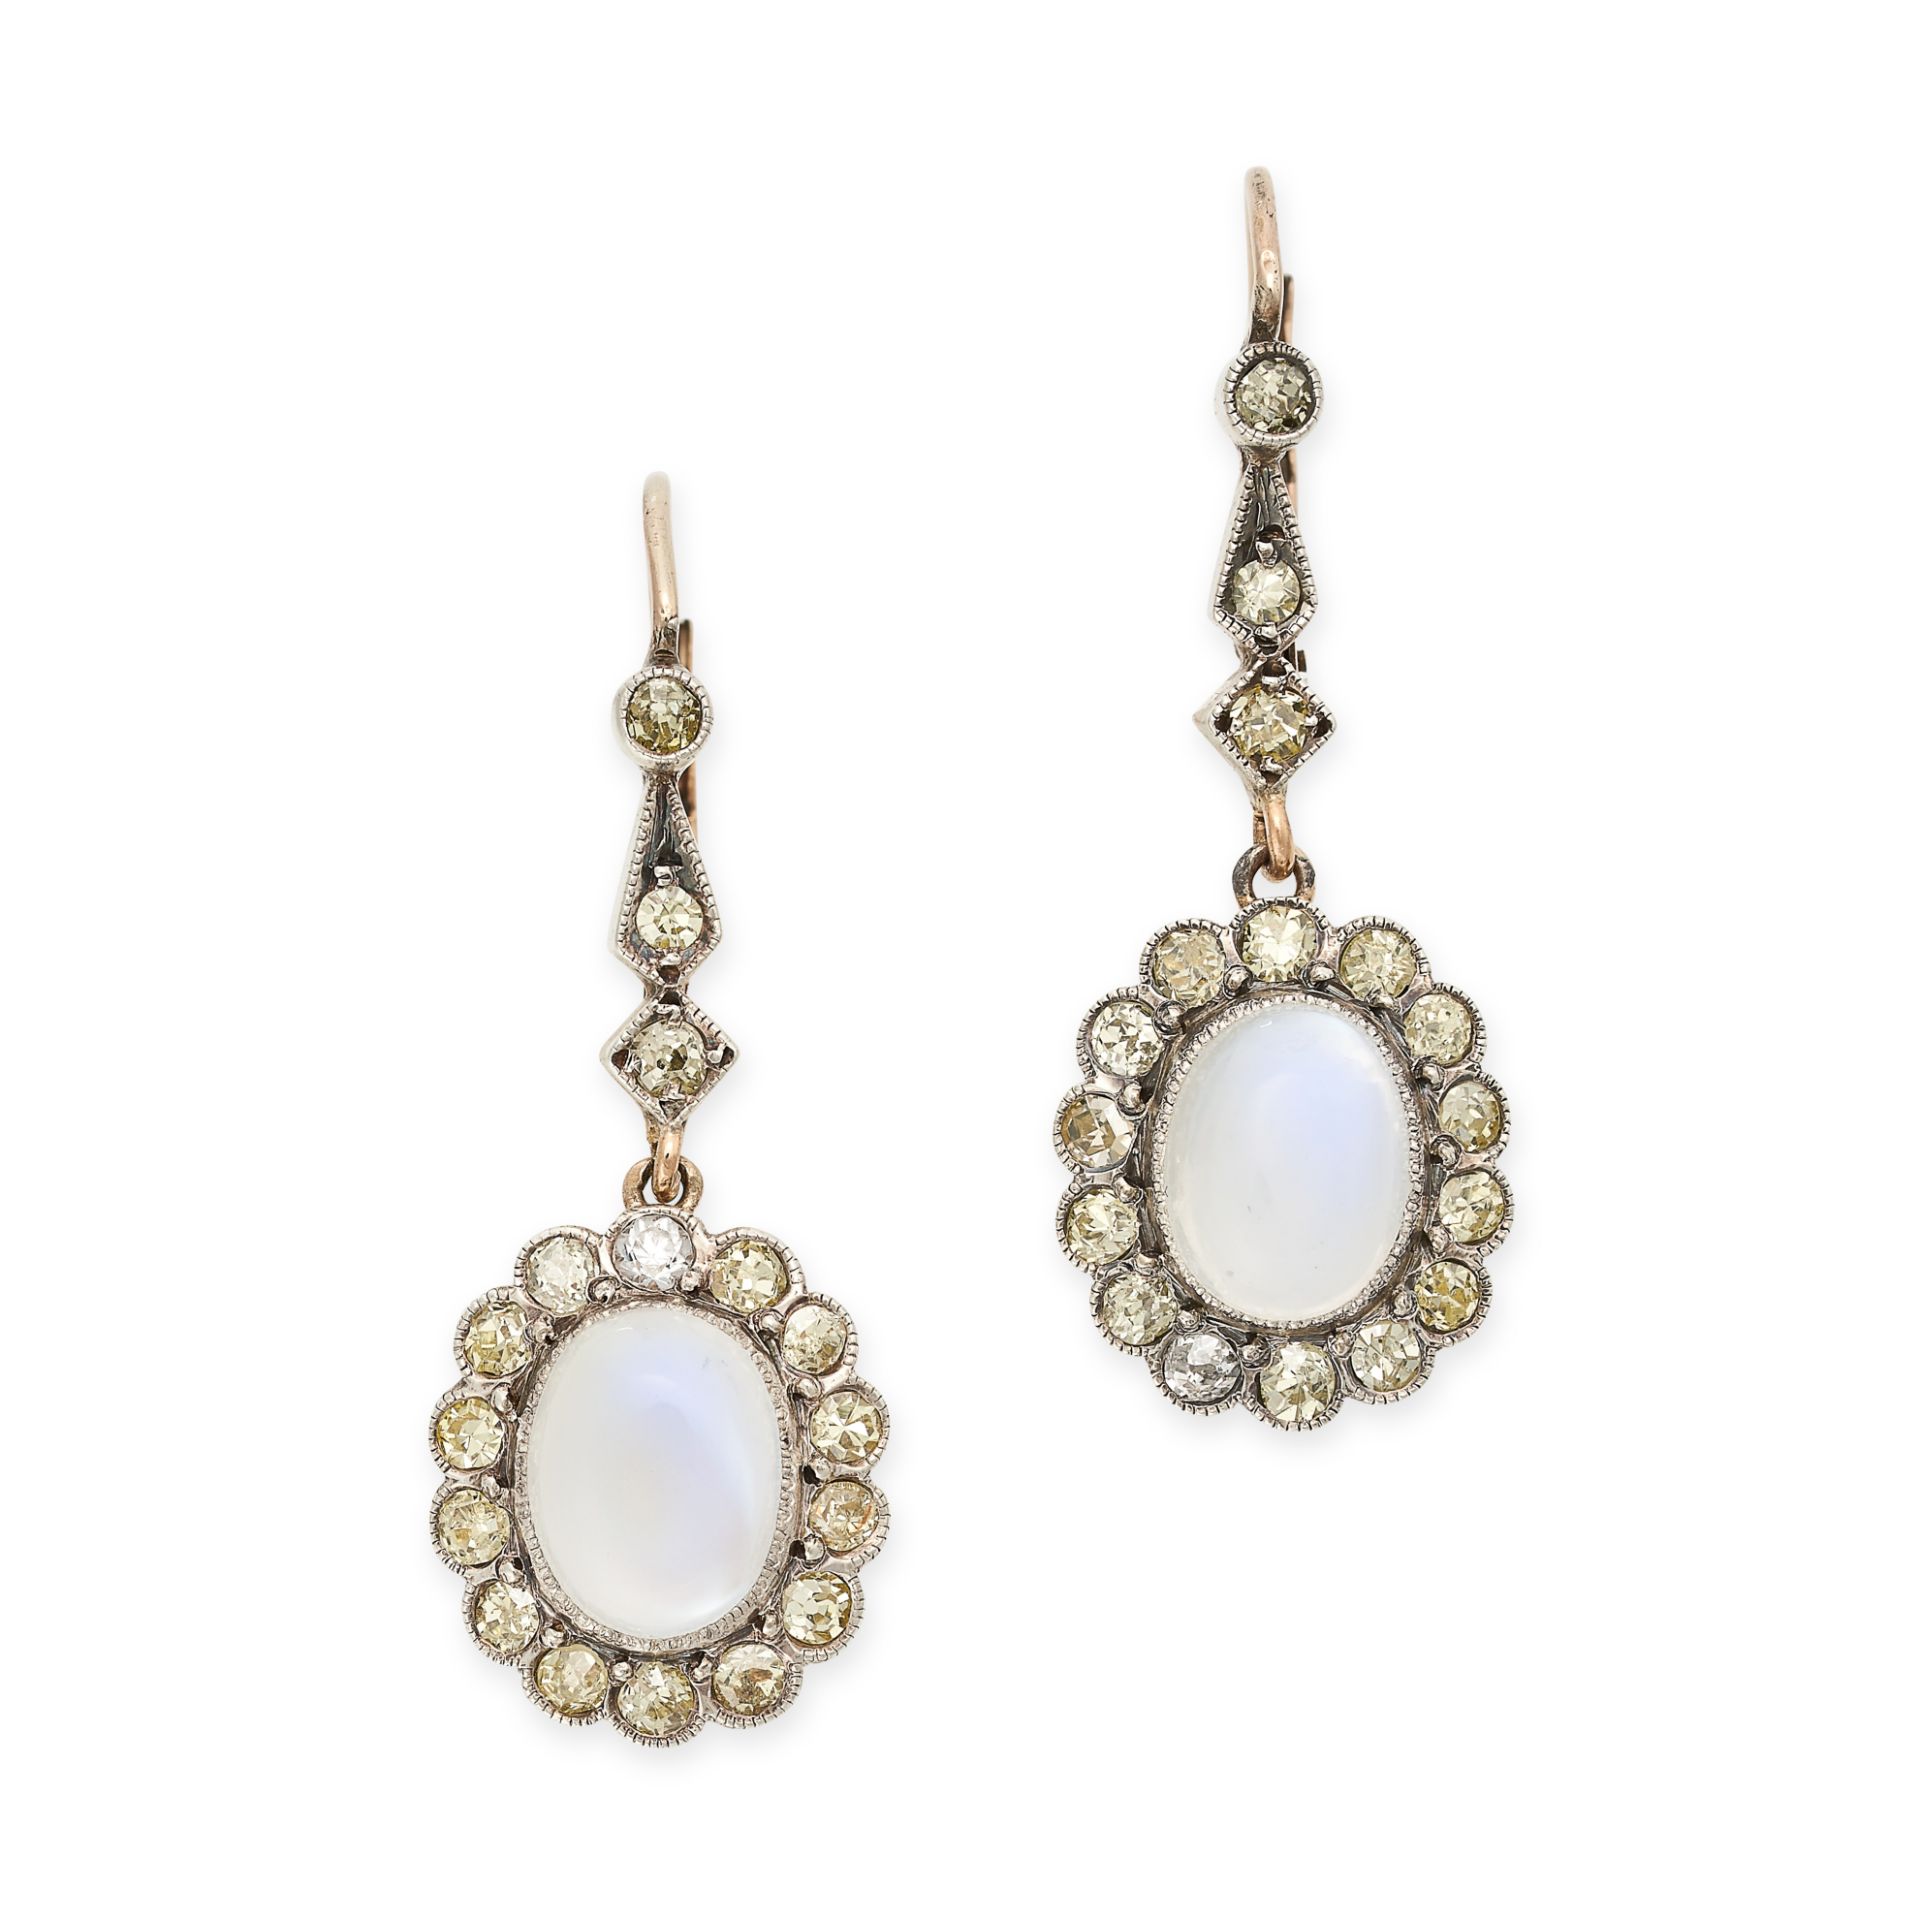 A PAIR OF ANTIQUE MOONSTONE AND DIAMOND DROP EARRINGS in yellow gold, each set with a row of